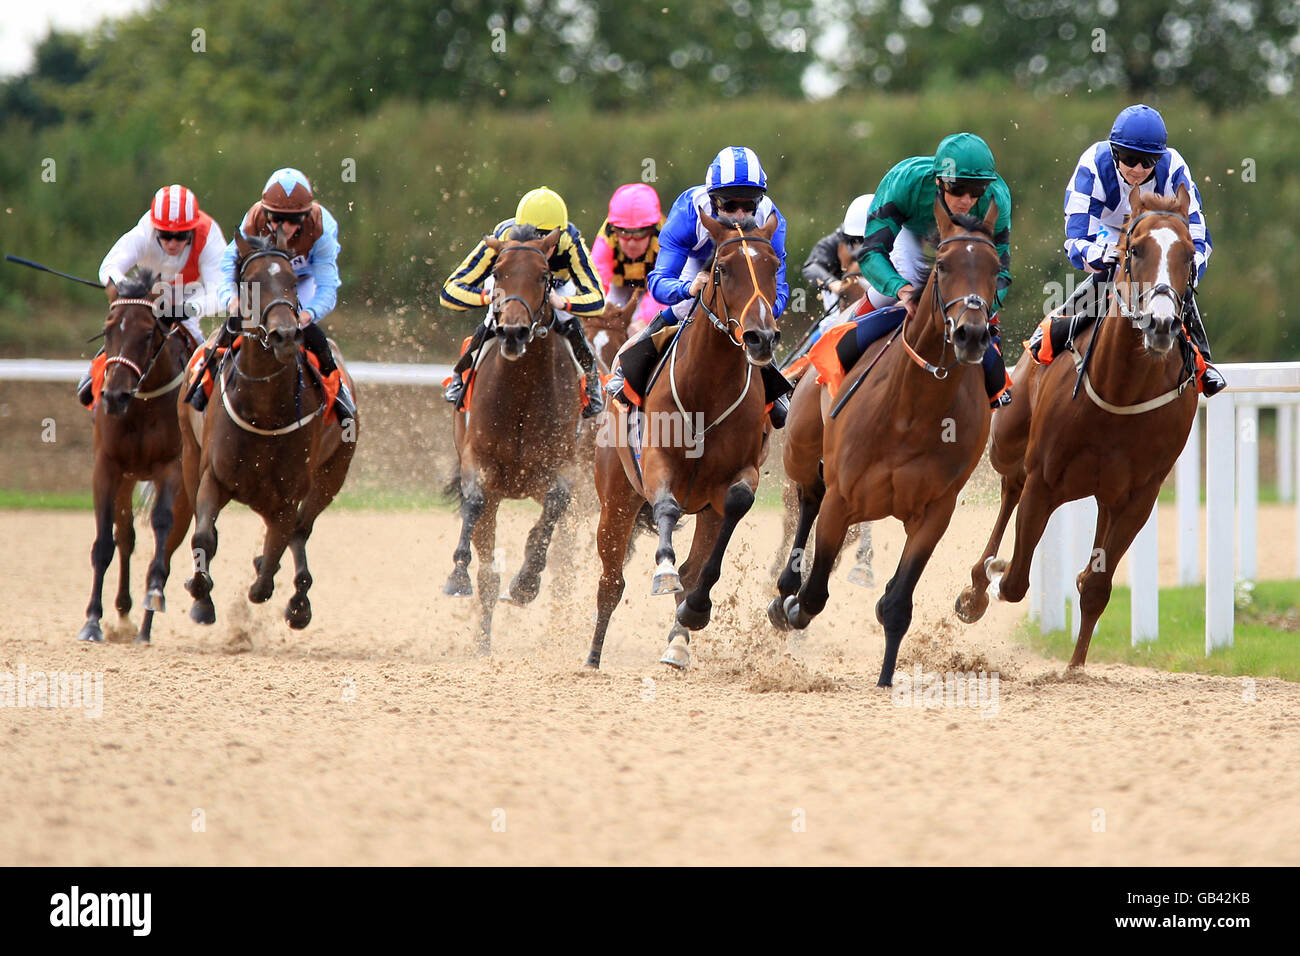 Jockey Frankie Dettori (2nd right) on Anne of Kiev leads the field in the Hatfield Perveral Maiden Fillies' Stakes at Great Leighs Racecourse Stock Photo